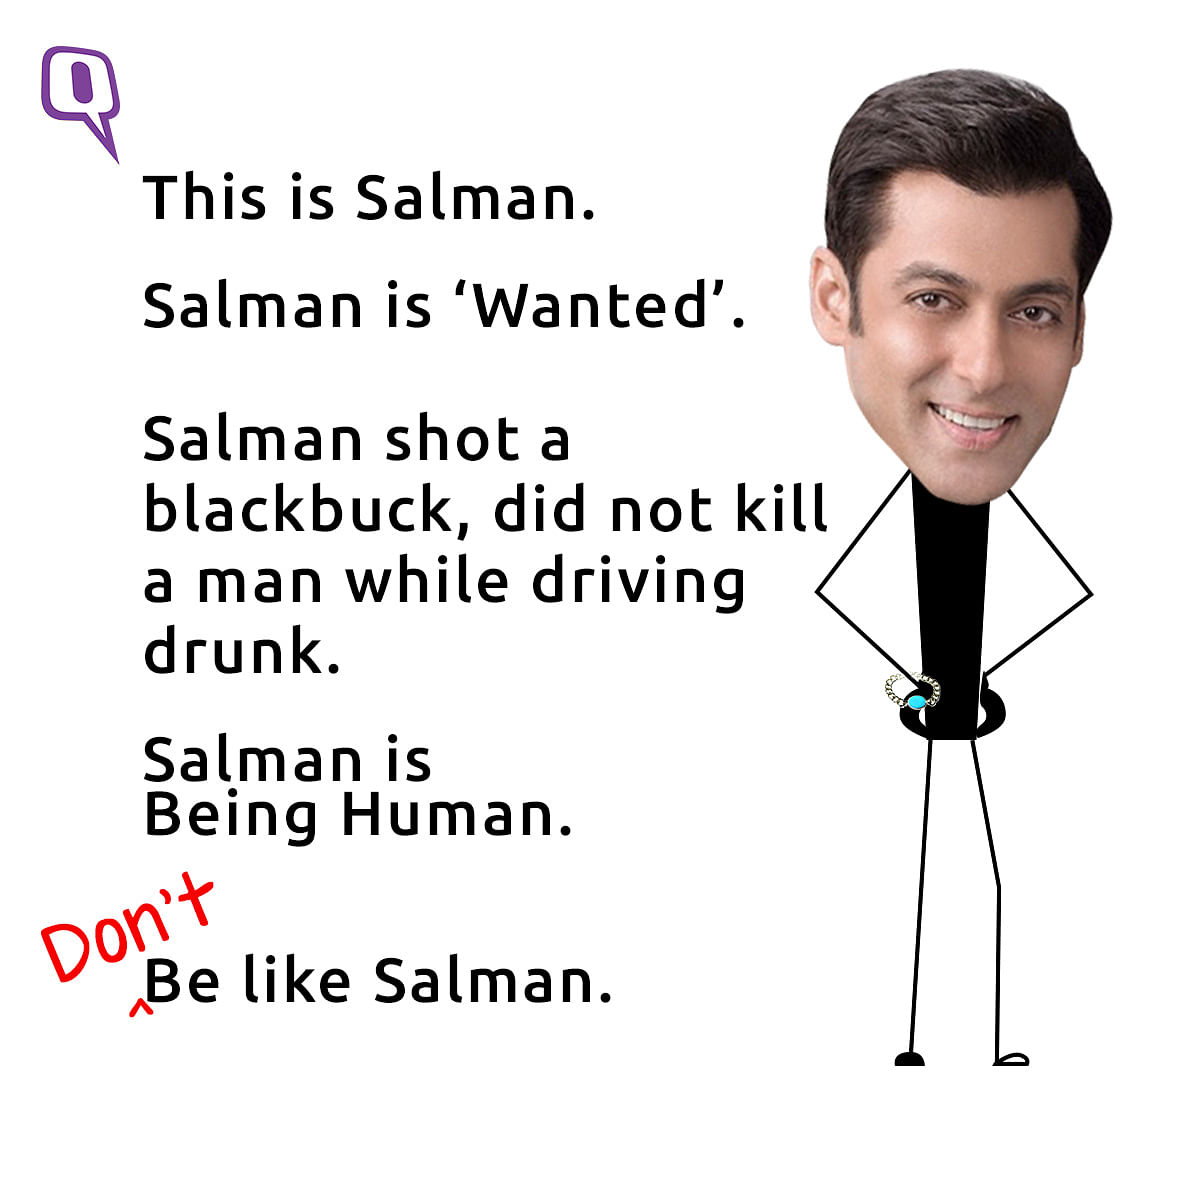 Let’s talk about bhai who, turns out, is not that bhai-like.